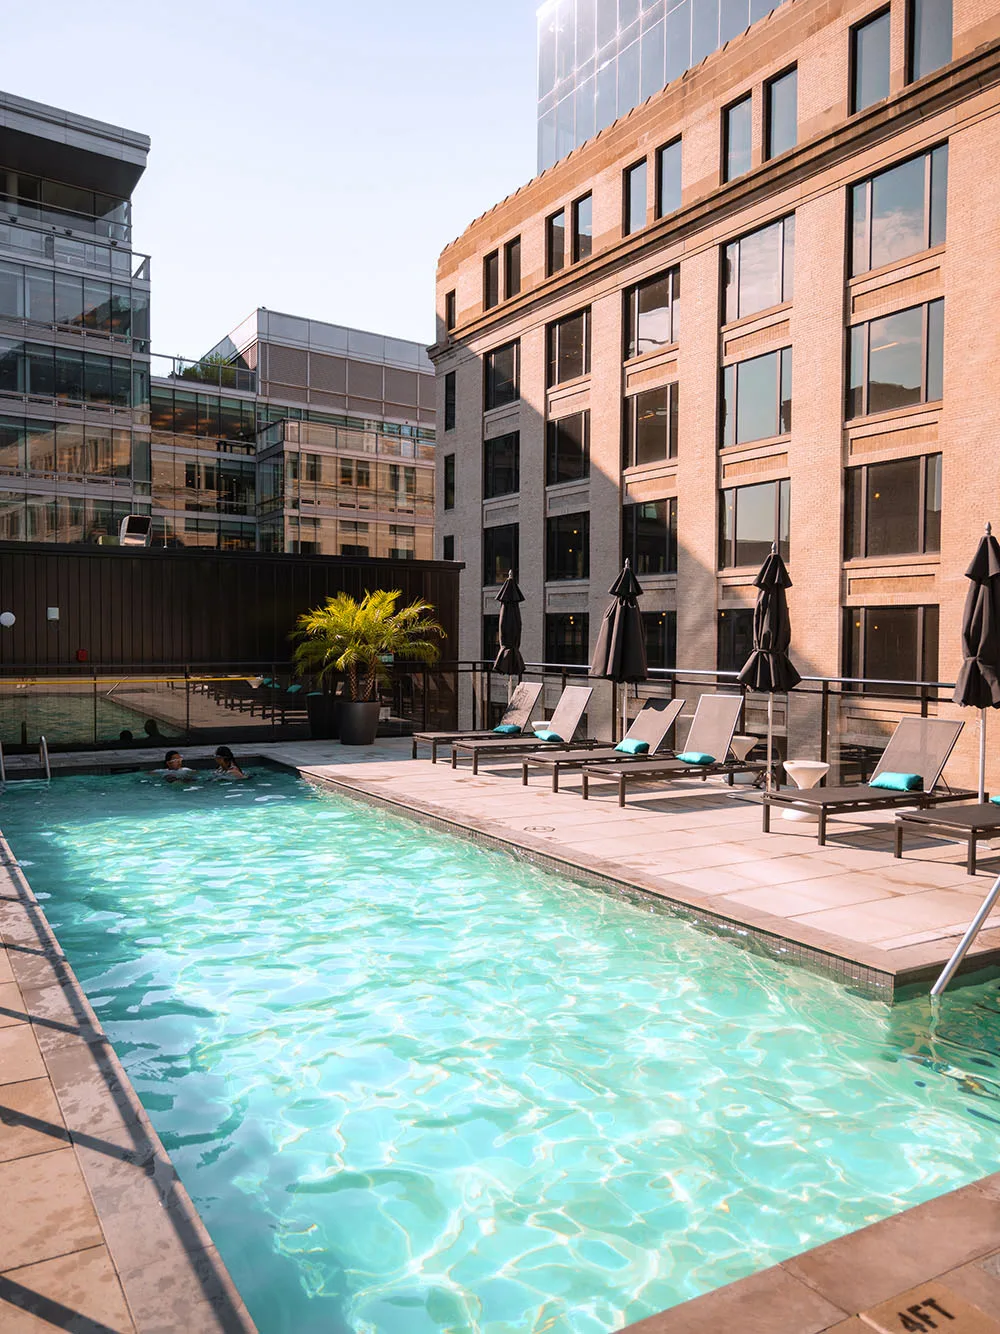 Planning a trip to Montreal soon? You'll definitely want to check out the brand new Humaniti Hotel Montreal! Located in the heart of downtown, this hotel is a true oasis in the city. Read on to find out why I loved it so much, and why you'll definitely want to book your next overnight stay in Montreal here! Pictured here: The rooftop pool